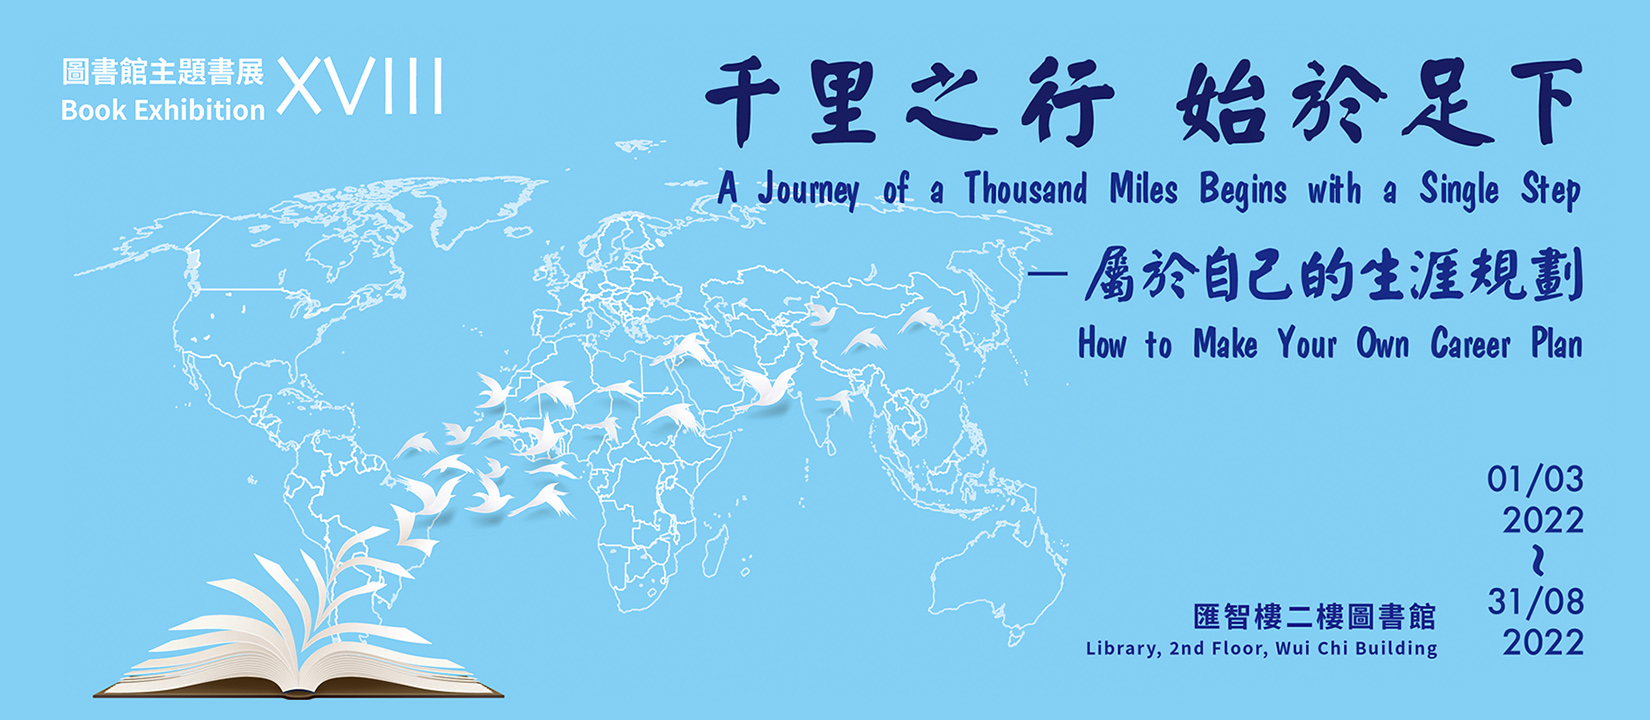 LIBRARY BOOK EXHIBITION 18 : A Journey of a Thousand Miles Begins with a Single Step – How to Make Your Own Career Plan